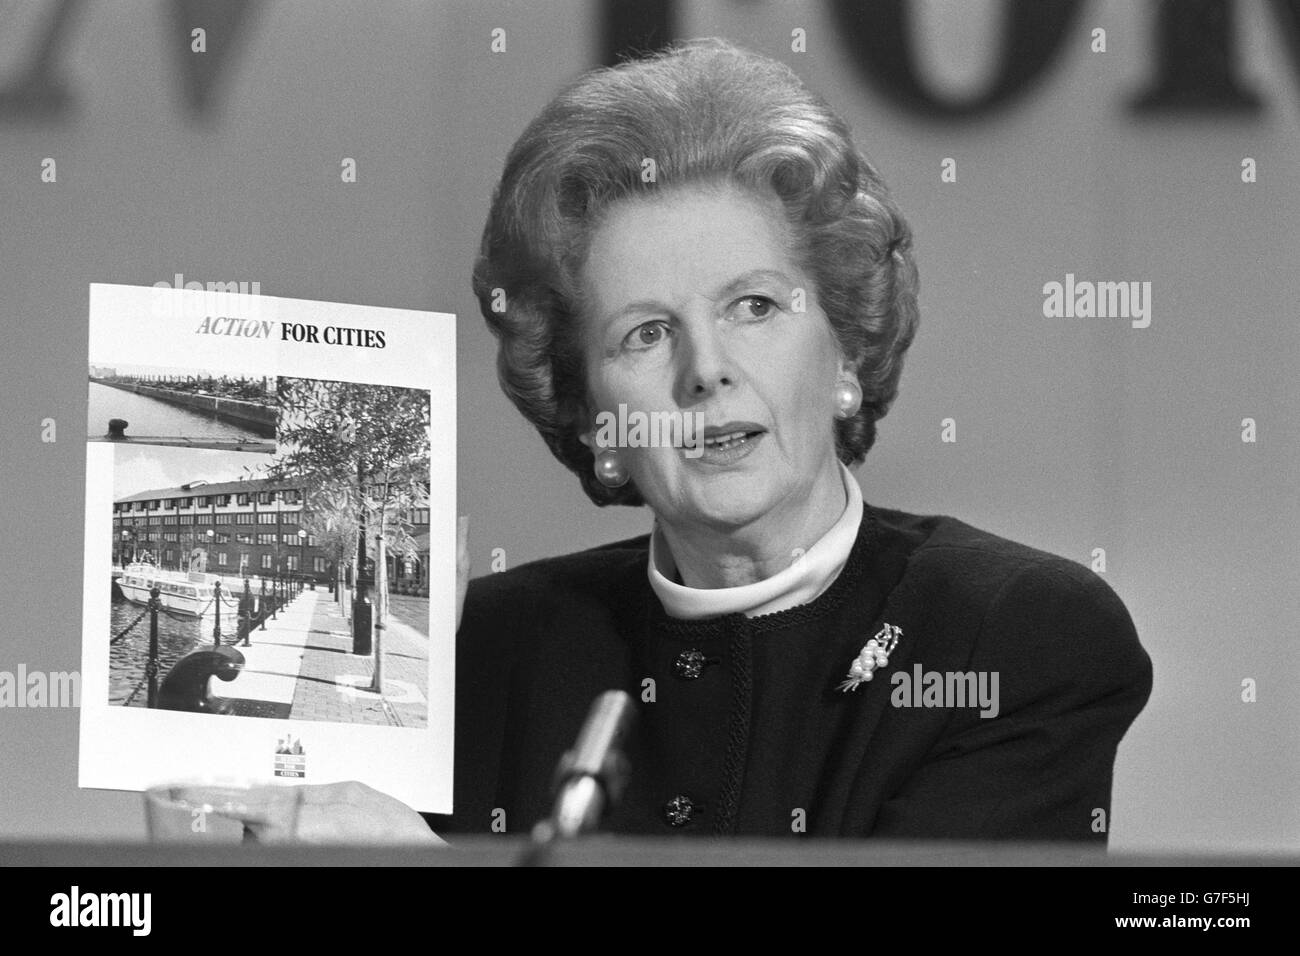 Prime Minister Margaret Thatcher holds up the Government booklet Action for Cities at a London press conference, in which major regeneration plans for inner cities were announced. Stock Photo